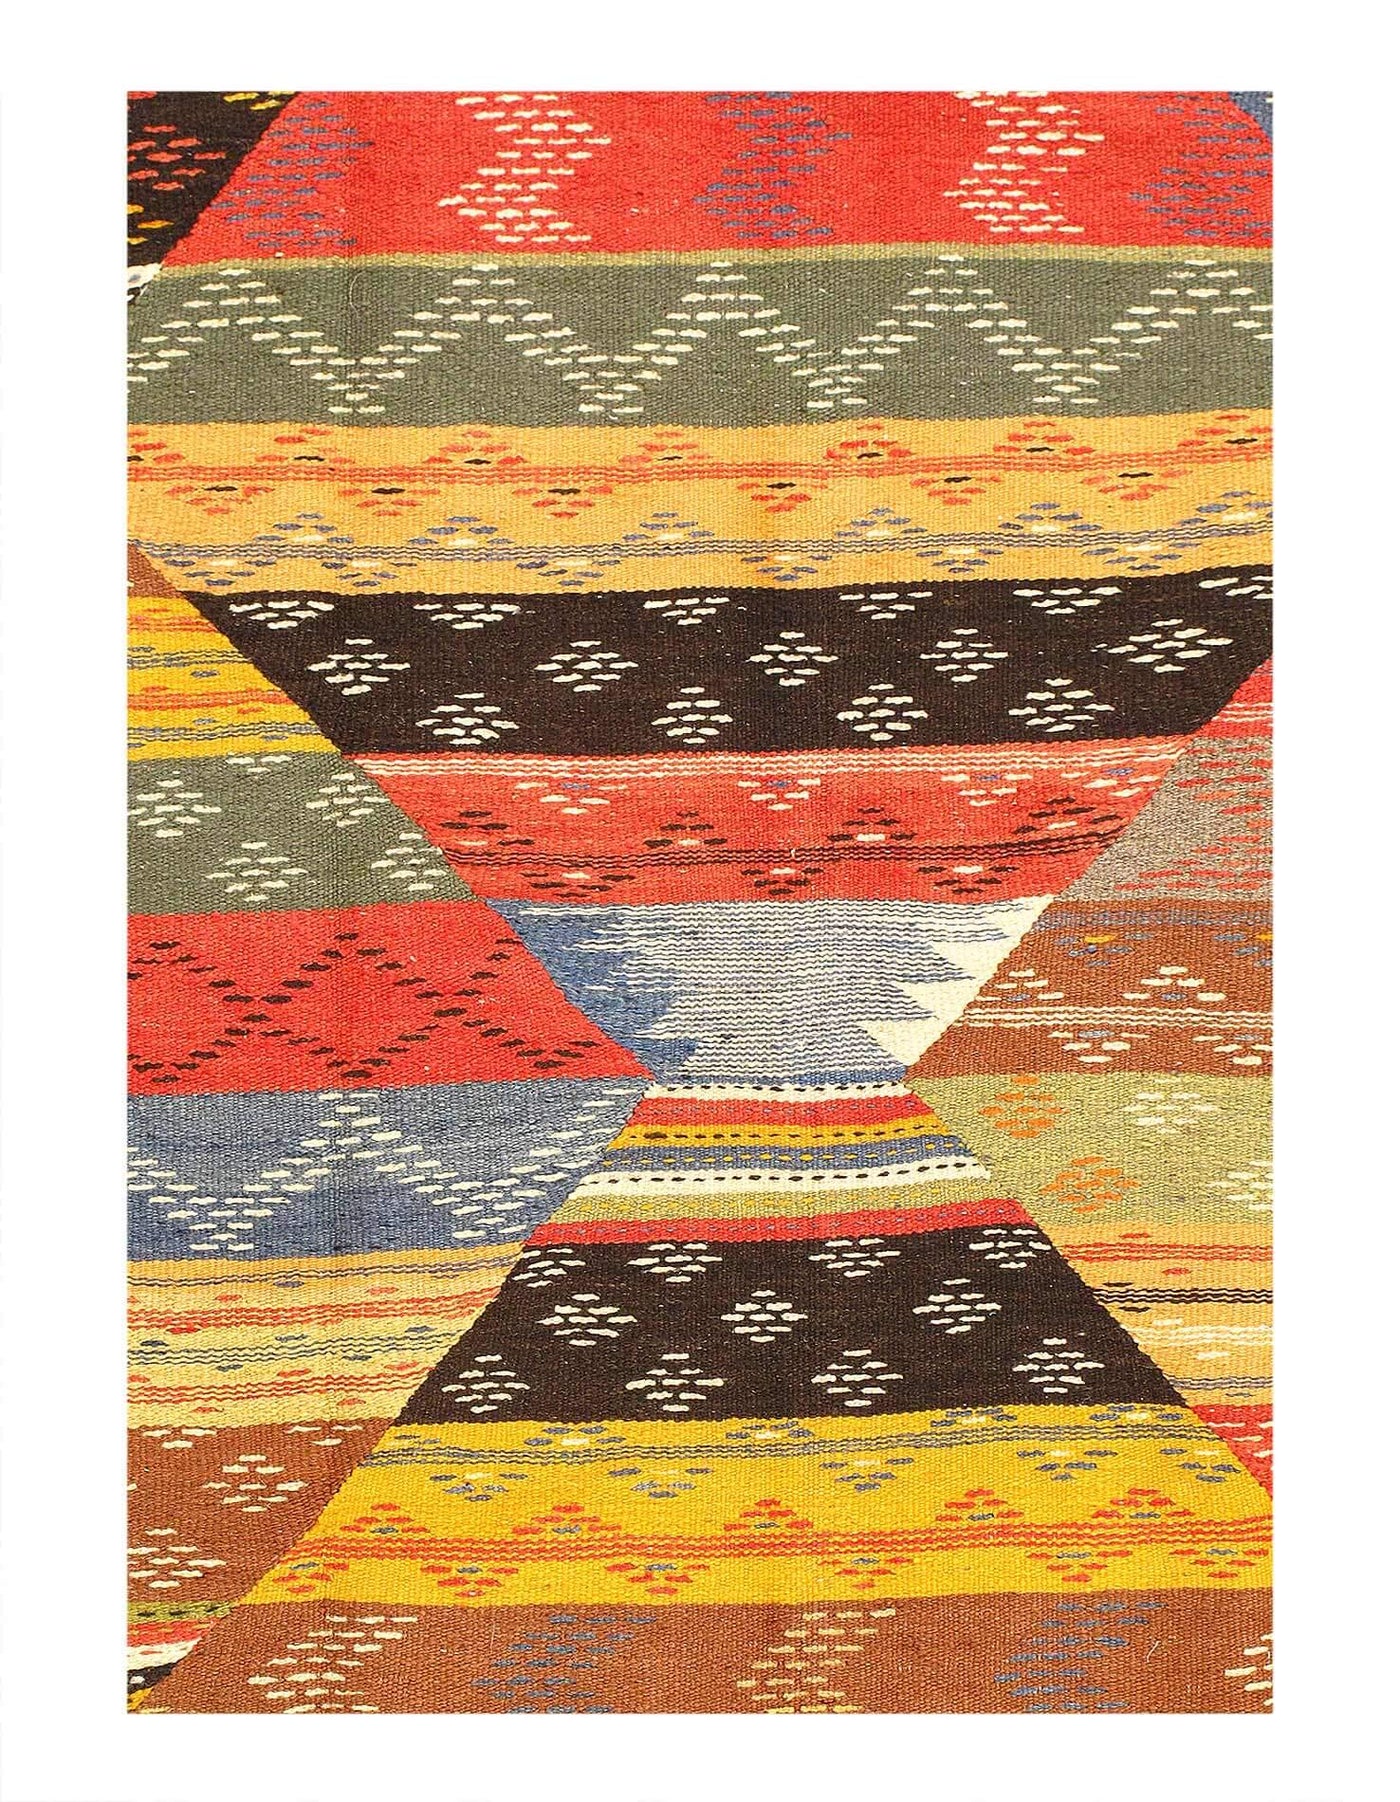 Canvello 1980's Flat Weave Wool Moroccan Rug - 5'3" x 8'6"